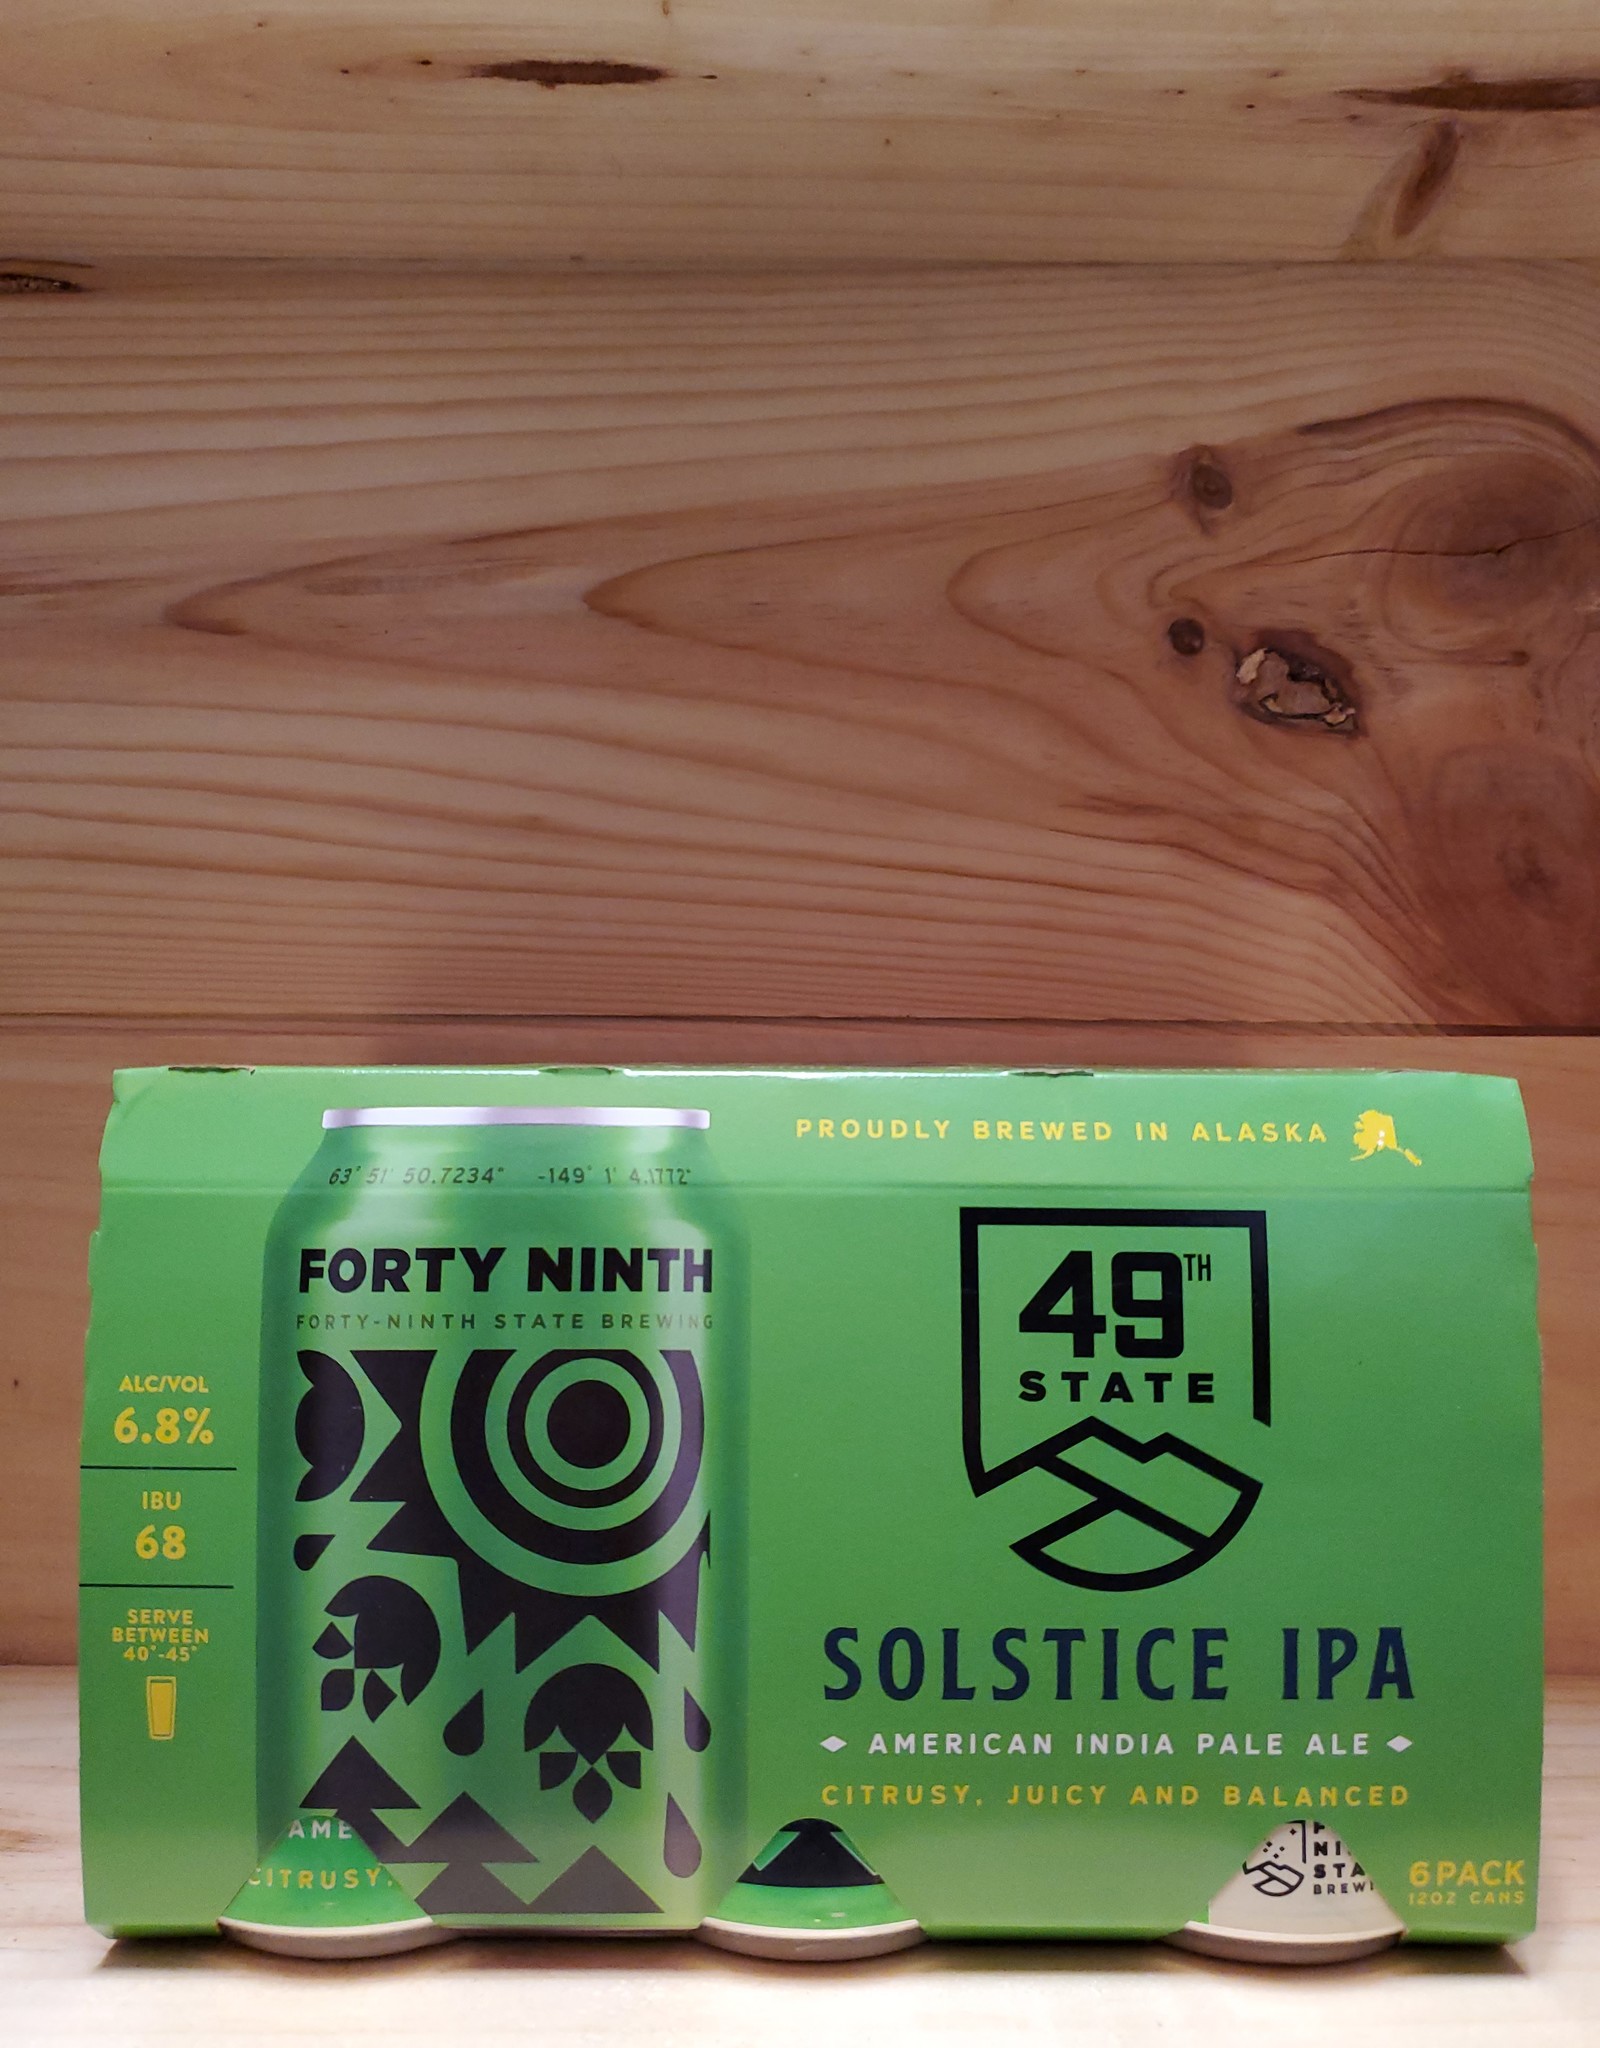 49th State Solstice IPA Cans 6-pack